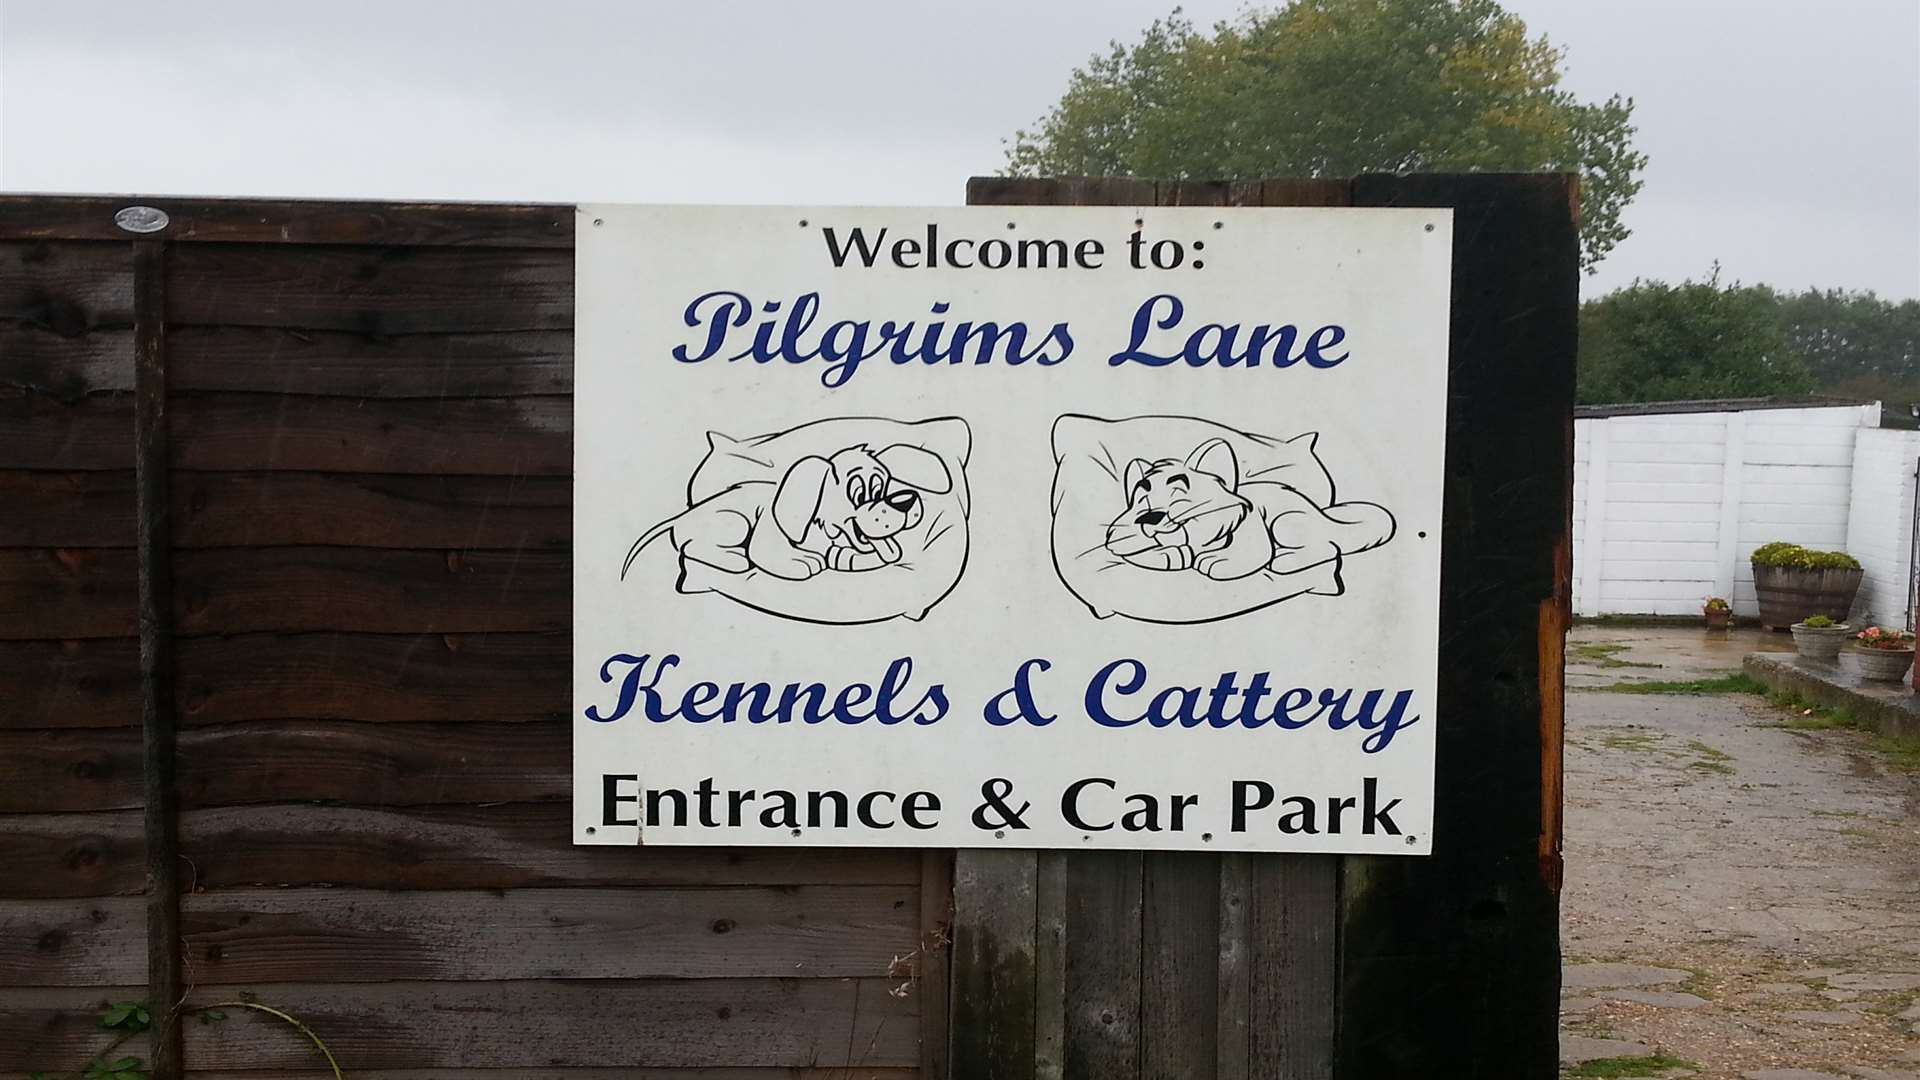 The Pilgrims Lane Kennels and Cattery is just off the Thanet Way